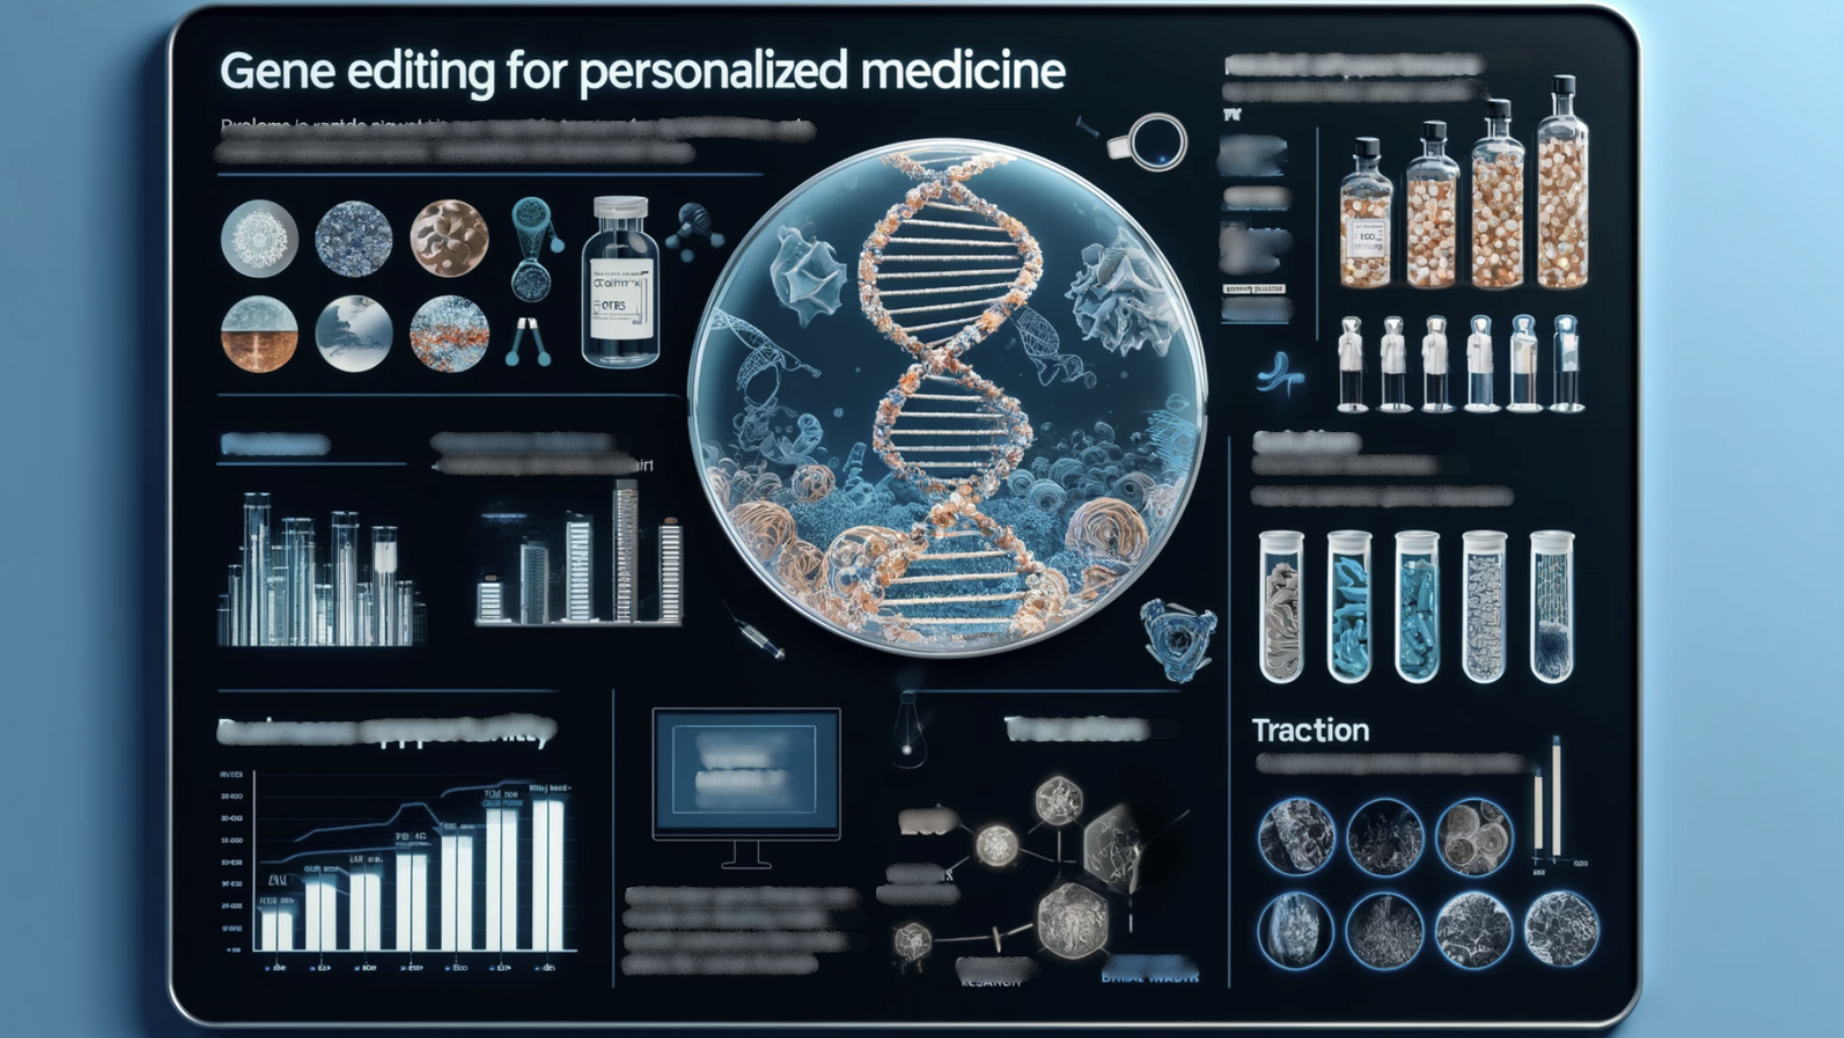 A mock up of the actual deck for the Gene Editing for Personalized Medicine pitch deck